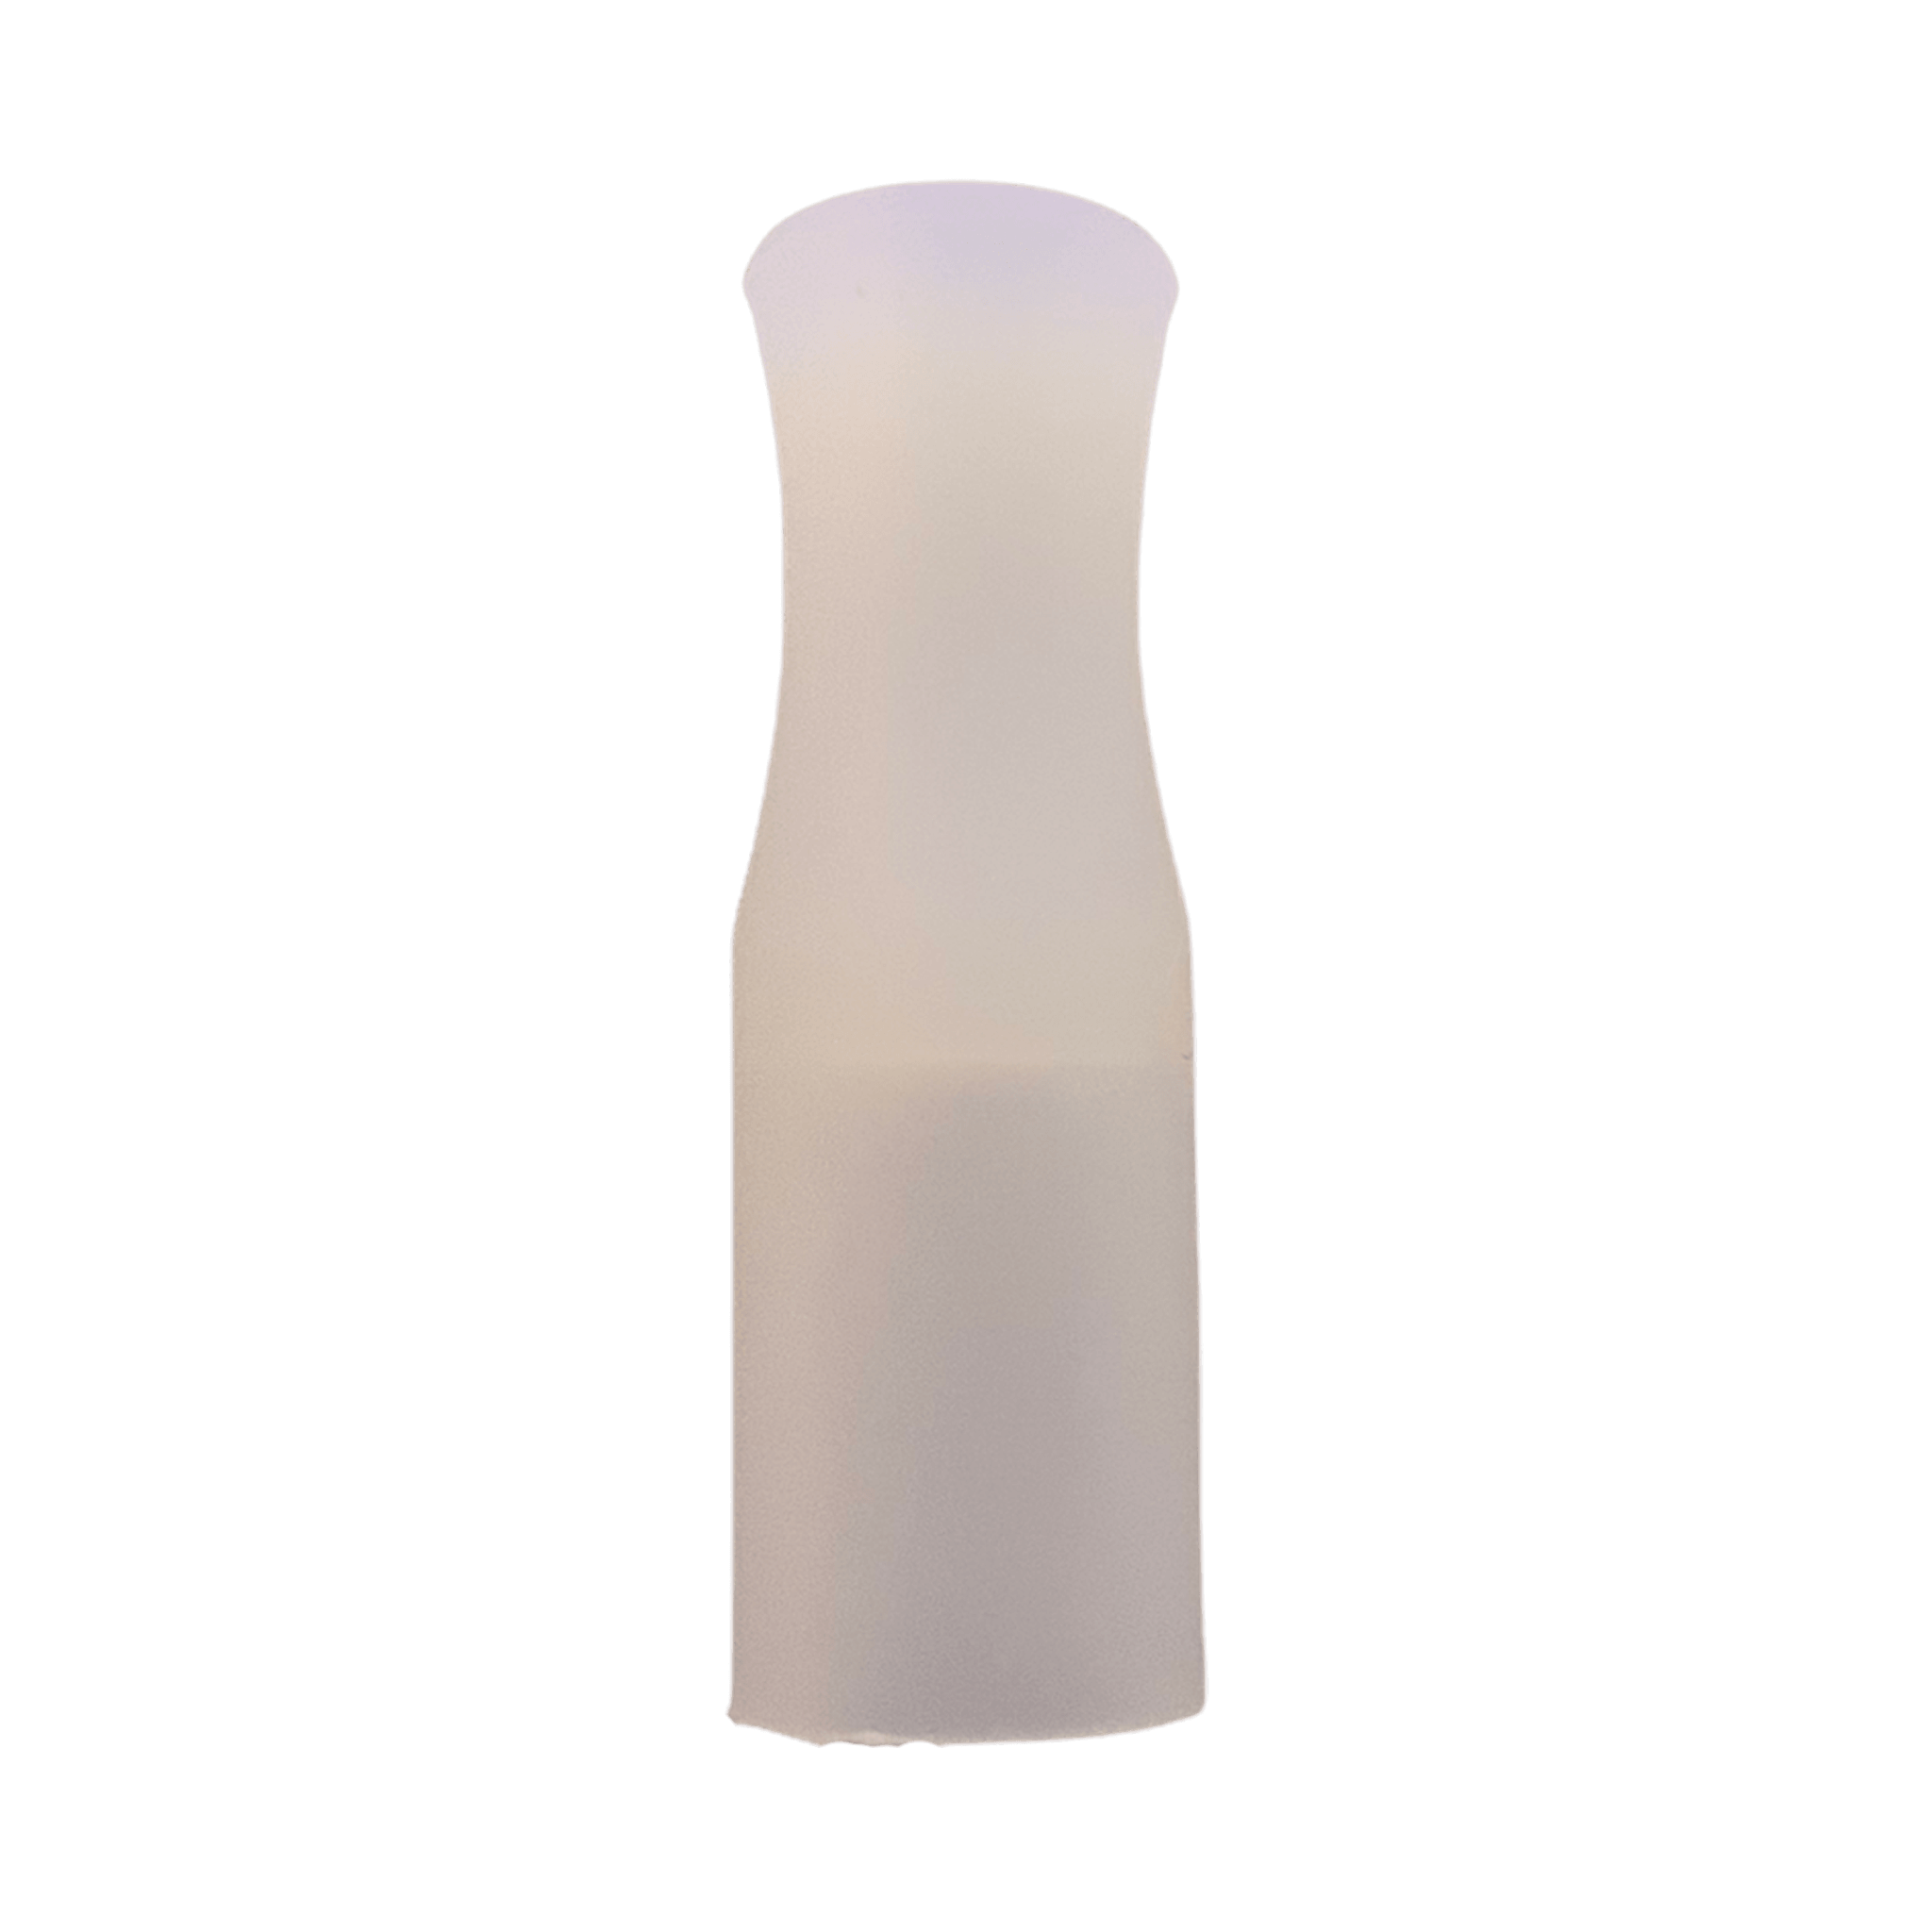 12mm Silicone Straw Tips Waterfall Shape – Forked Again